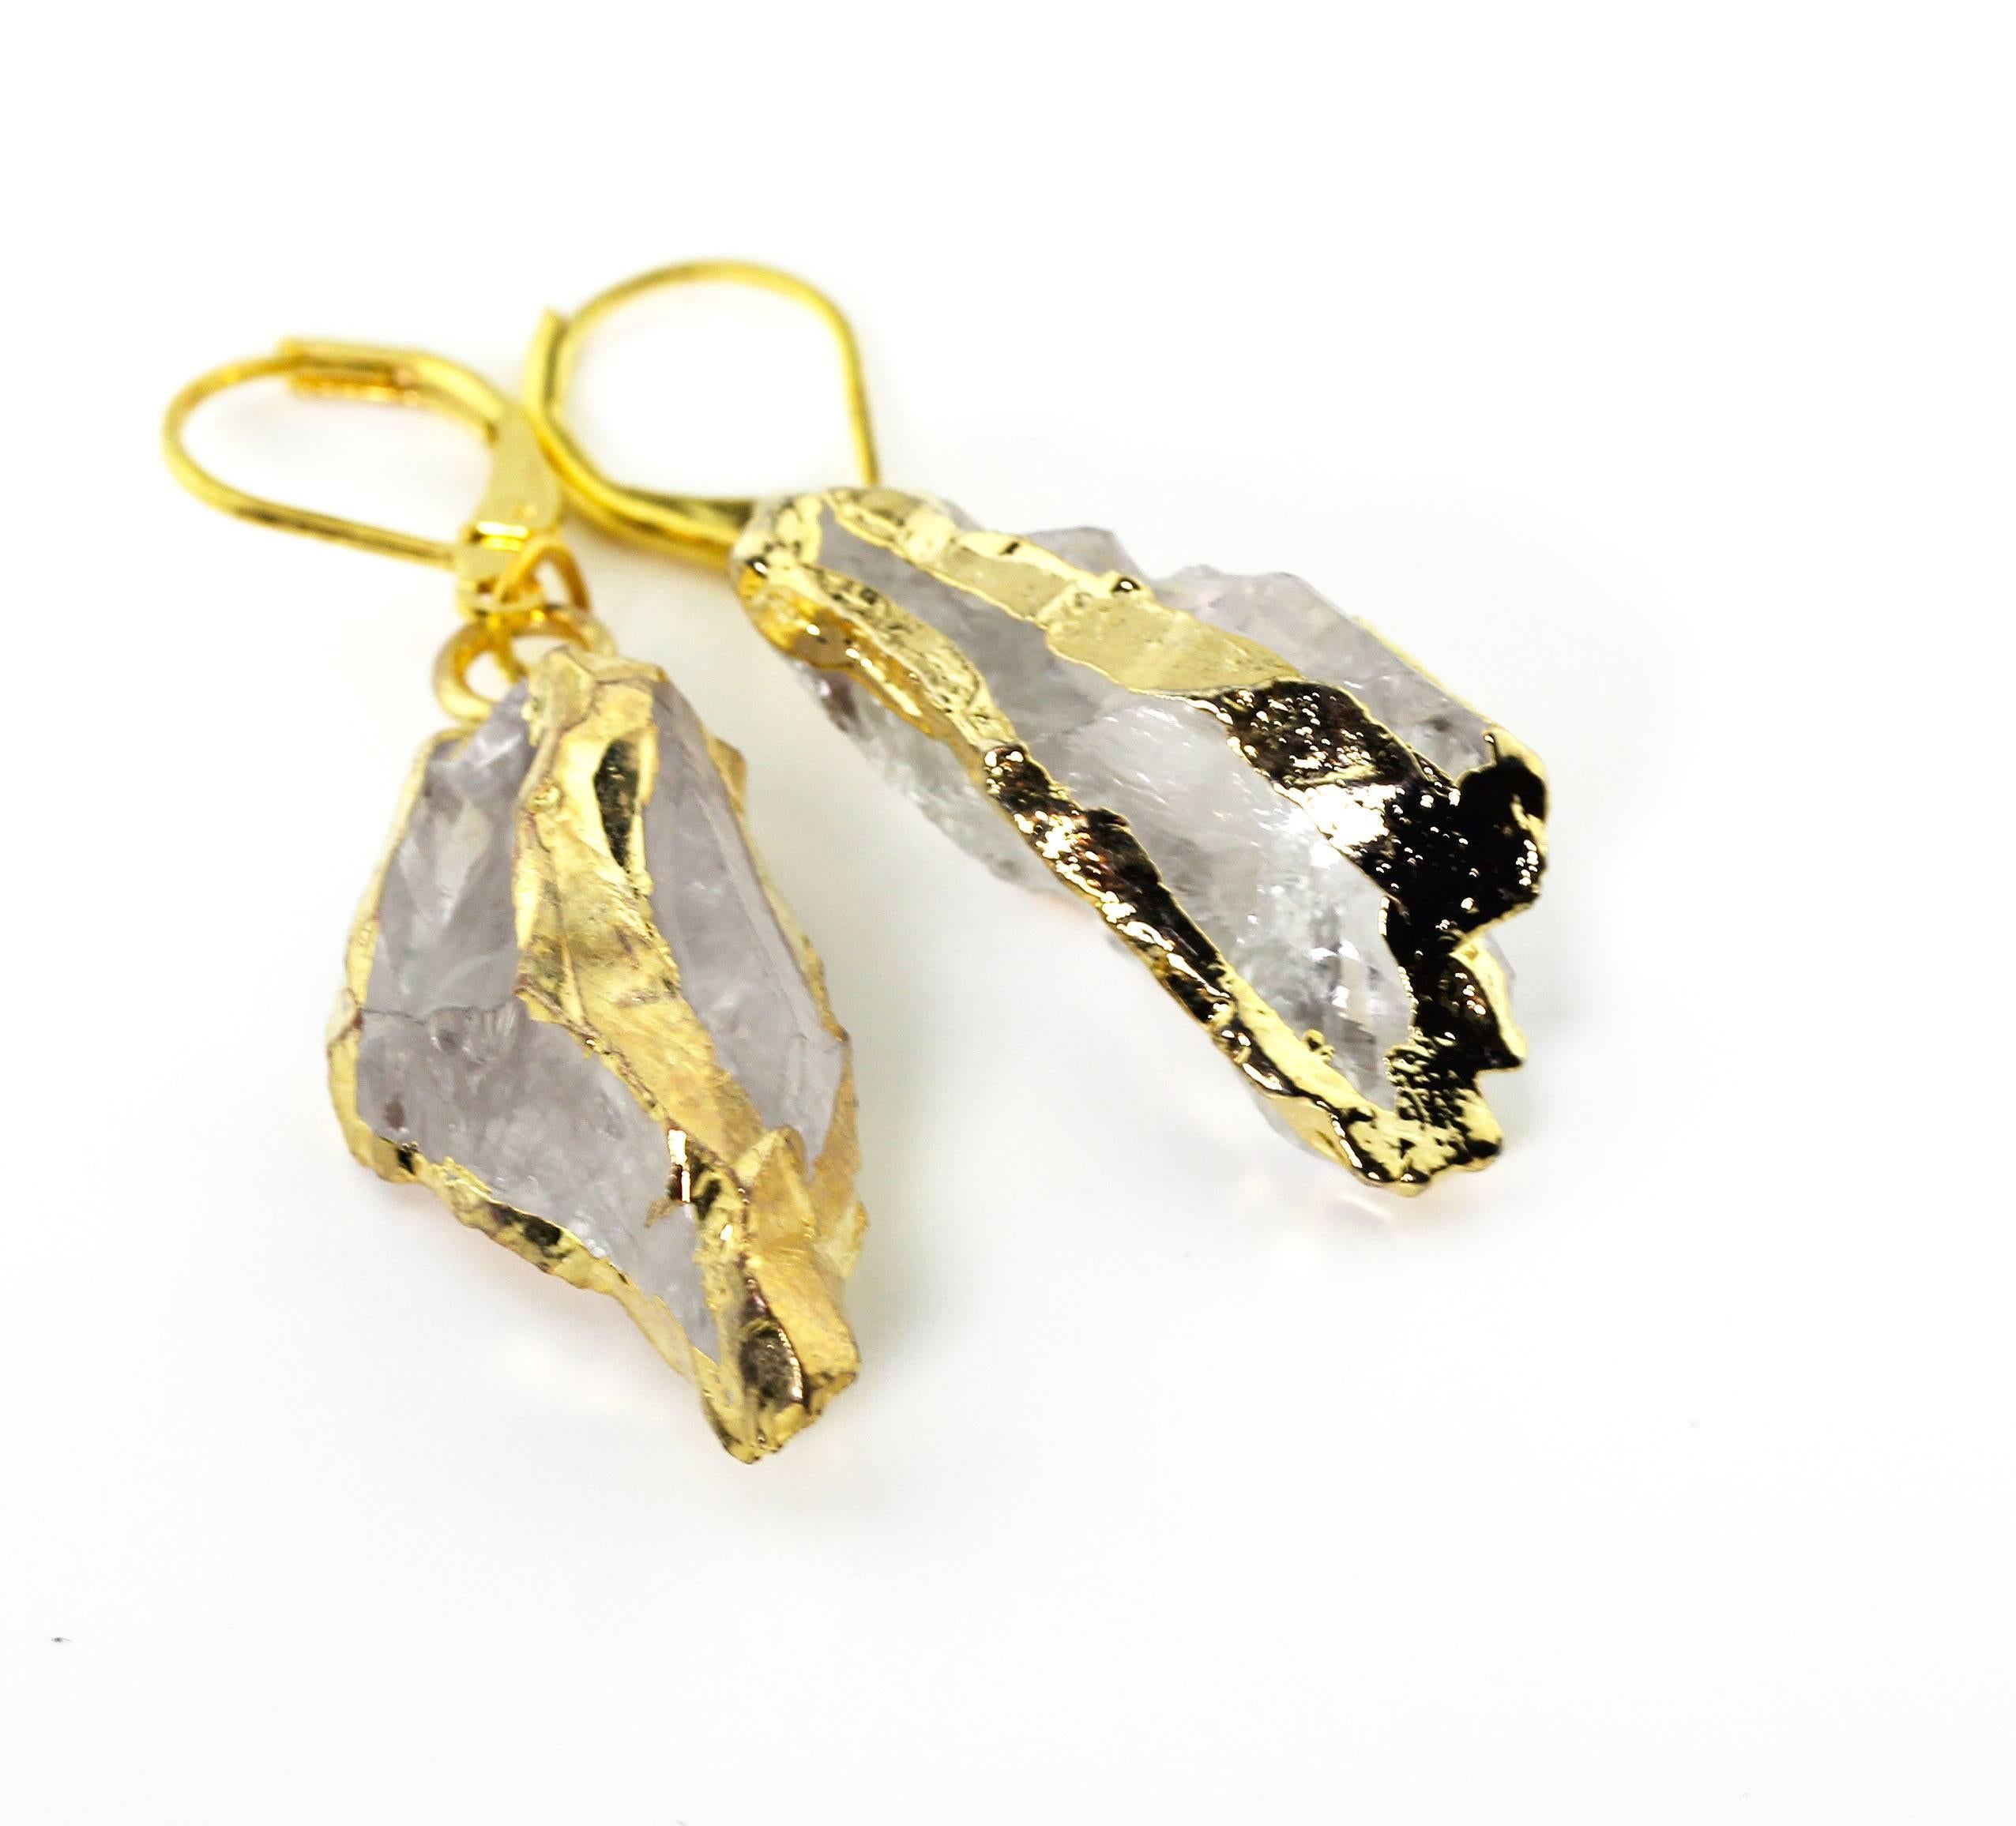 Bright translucent natural White Quartz polished rock dangling gold plated lever-back earrings.  They hang approximately 2 inches long and glitter happily from daytime to evening.